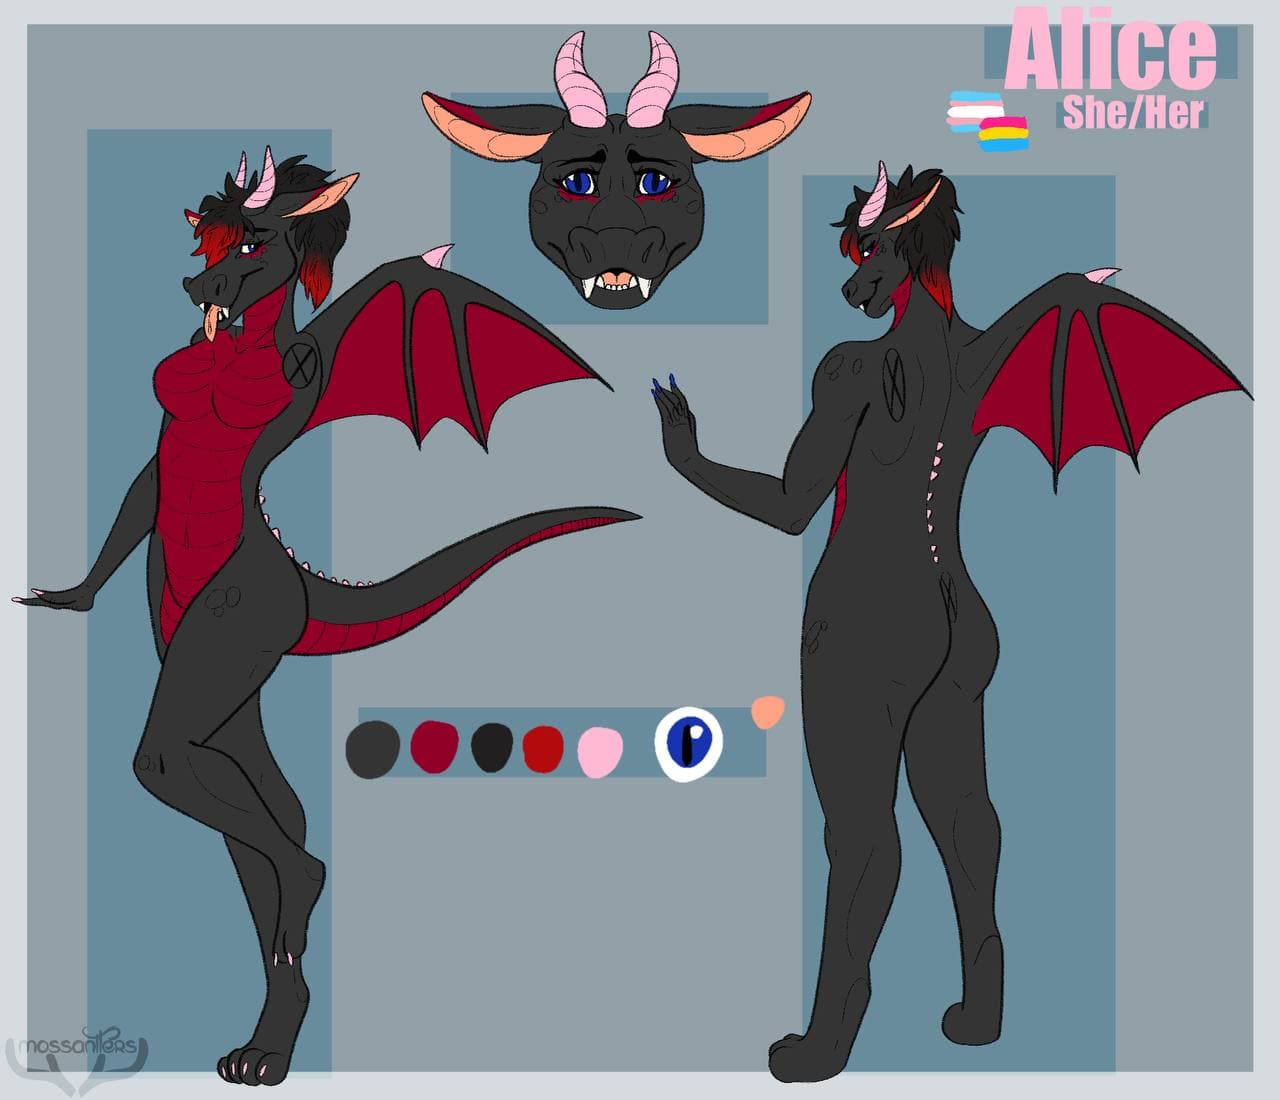 It's a ref sheet of a black/red dragon anthro with blue eyes.